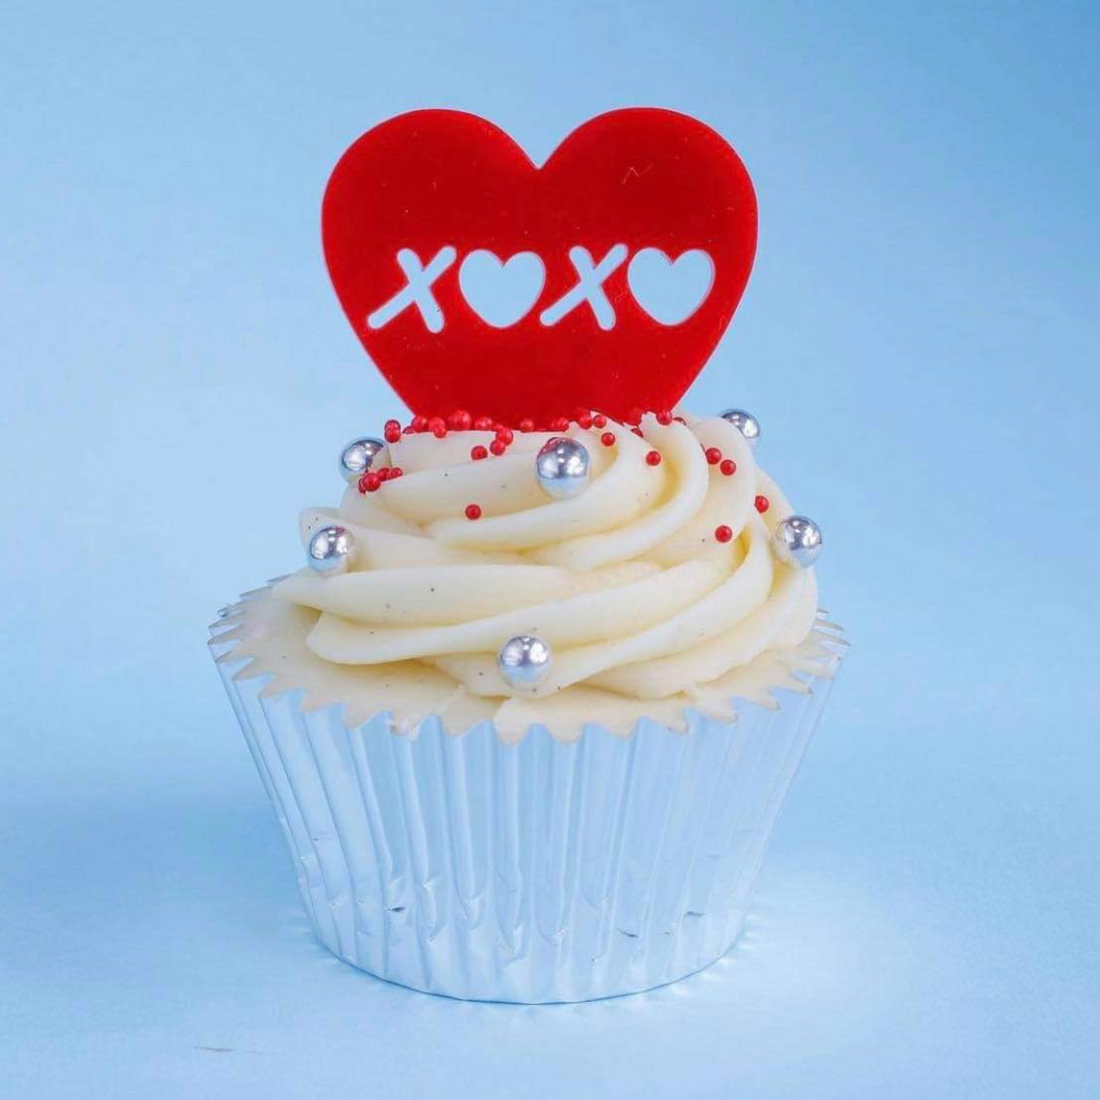 XOXO Cupcake Charms - Valentines Day Cupcakes